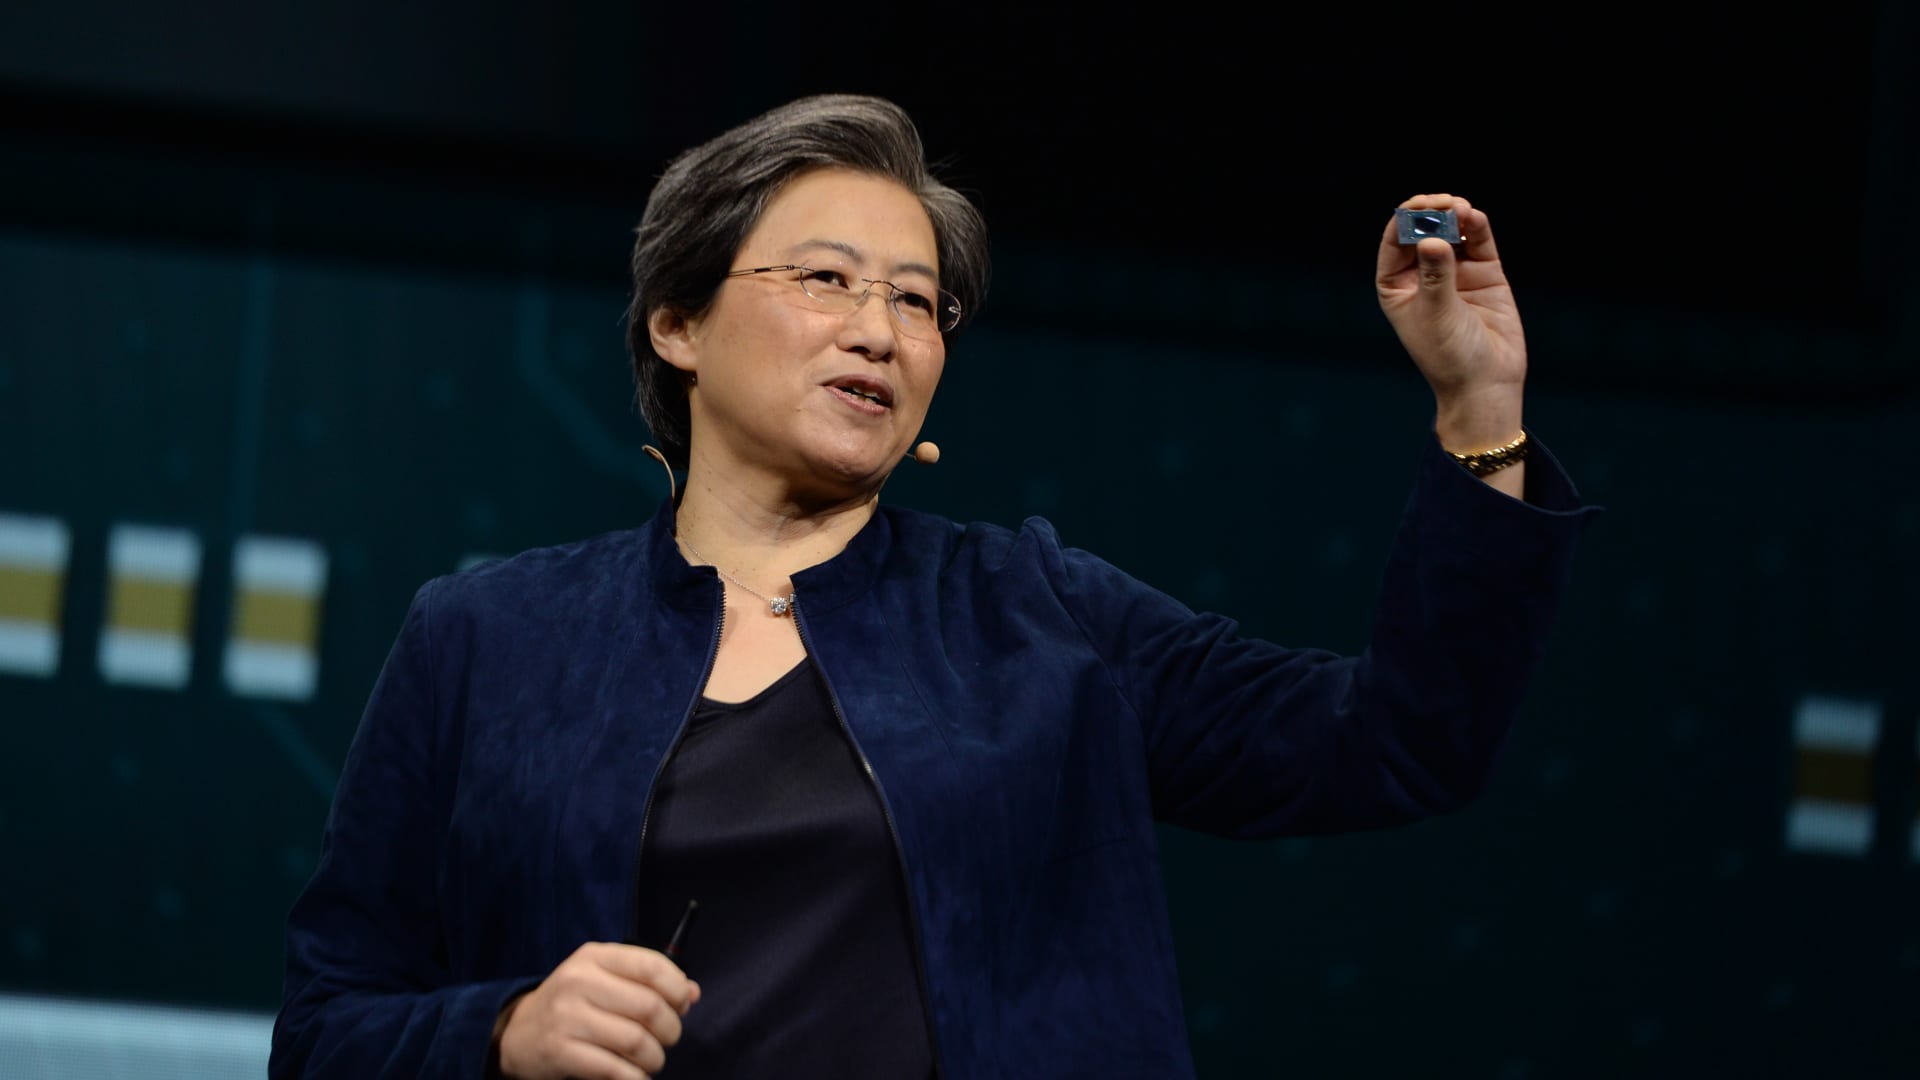 AMD delivers a Q4 beat amid industry headwinds, validating the Club investment case